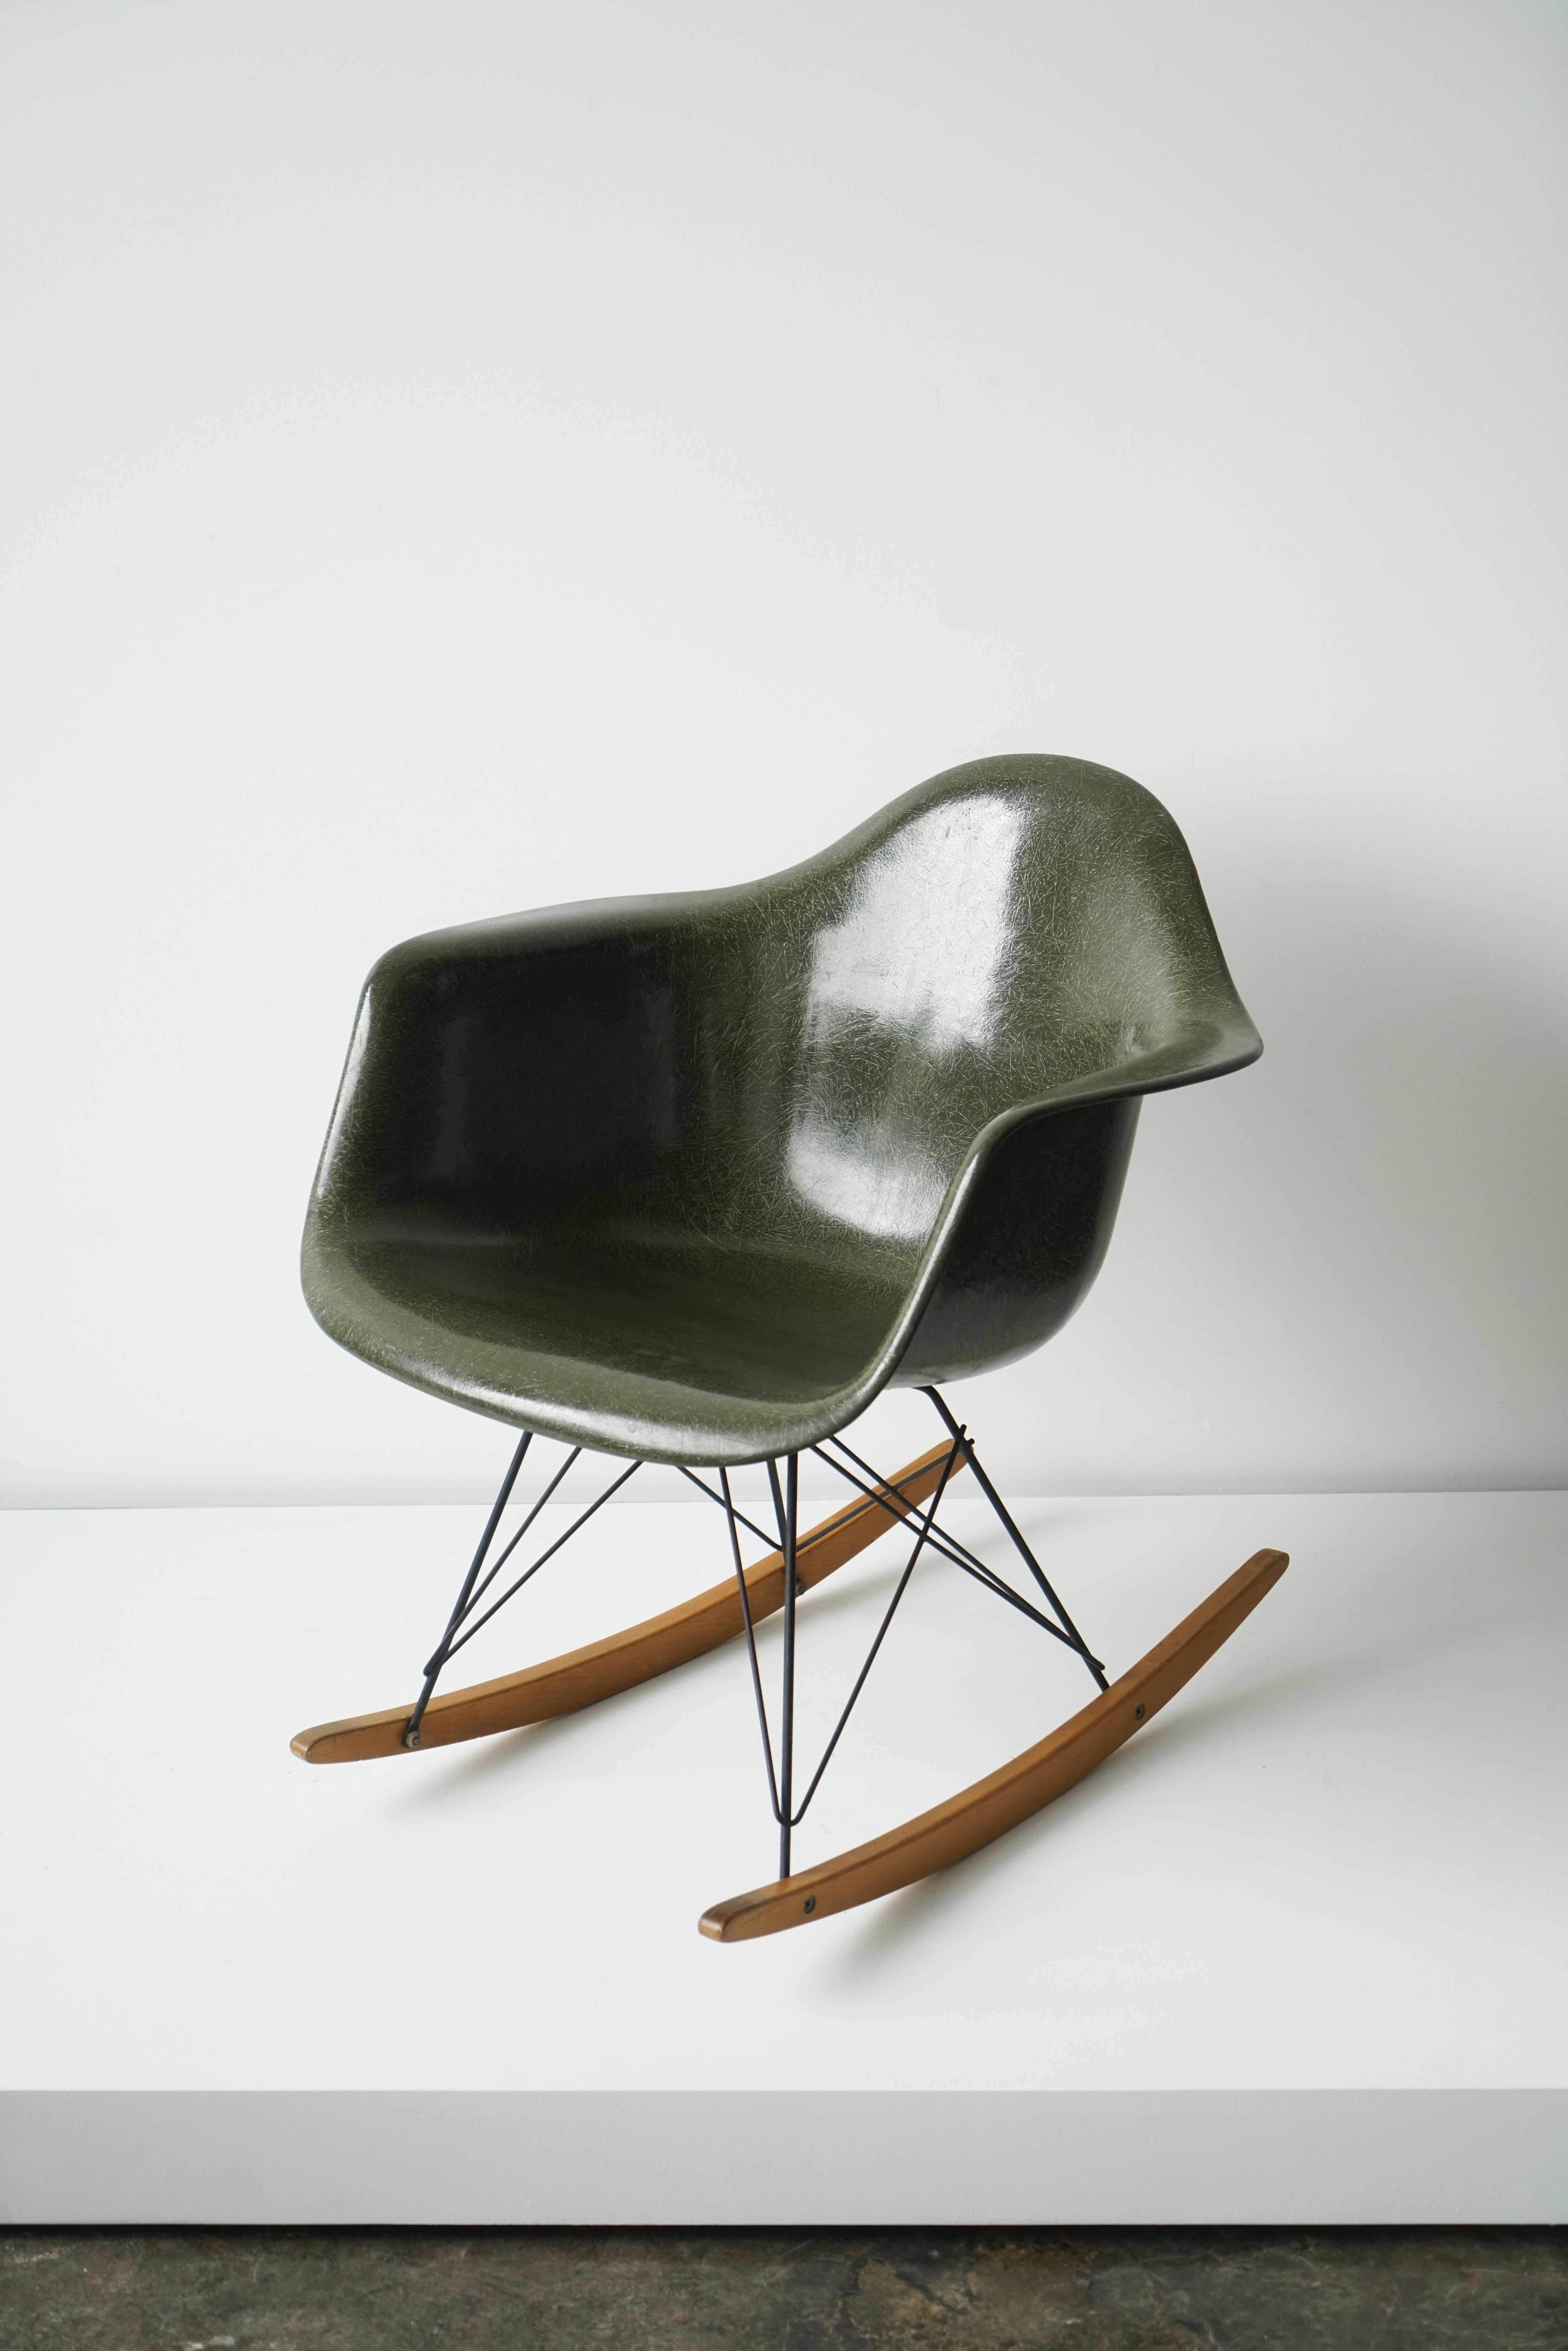 Ray and Charles Eames RAR rocking chair for Herman Miller
Circa 1965
Molded fiberglass seat in forest green. Birch runners.

Molded manufacturer's mark to underside. 

The famous Eames Rocking (R) Arm (A) Chair on Rod (R) Base, abbreviated to